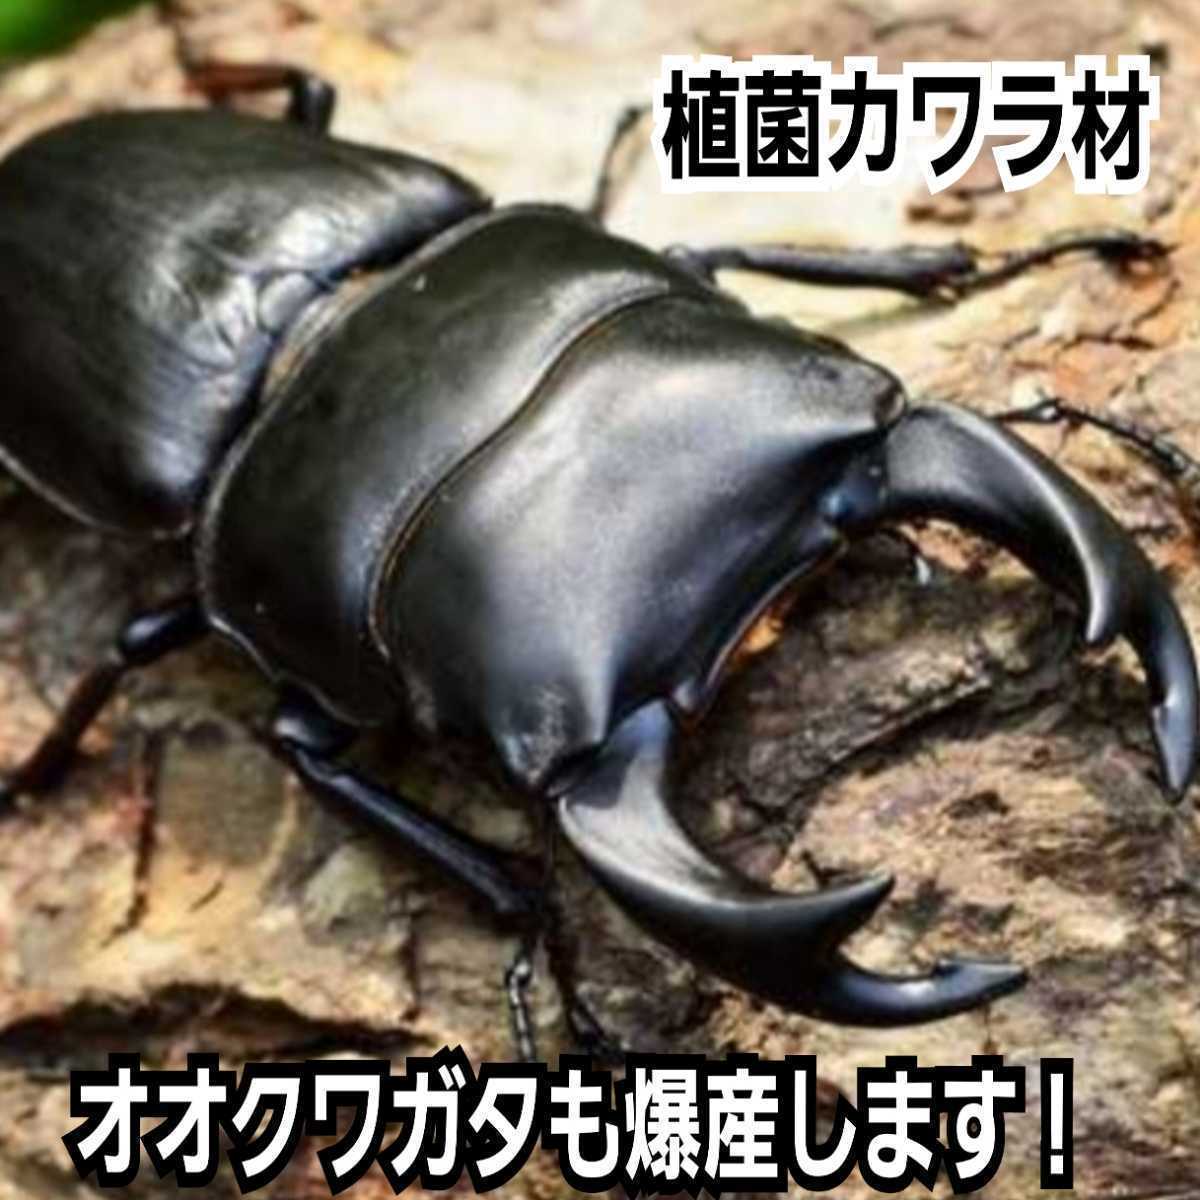  finest quality!.. leather la material [ 2 ps ] stag beetle. production egg - kore. strongest!ta Land us* regulation light *ougononi. eminent.!.. done . therefore mold not!